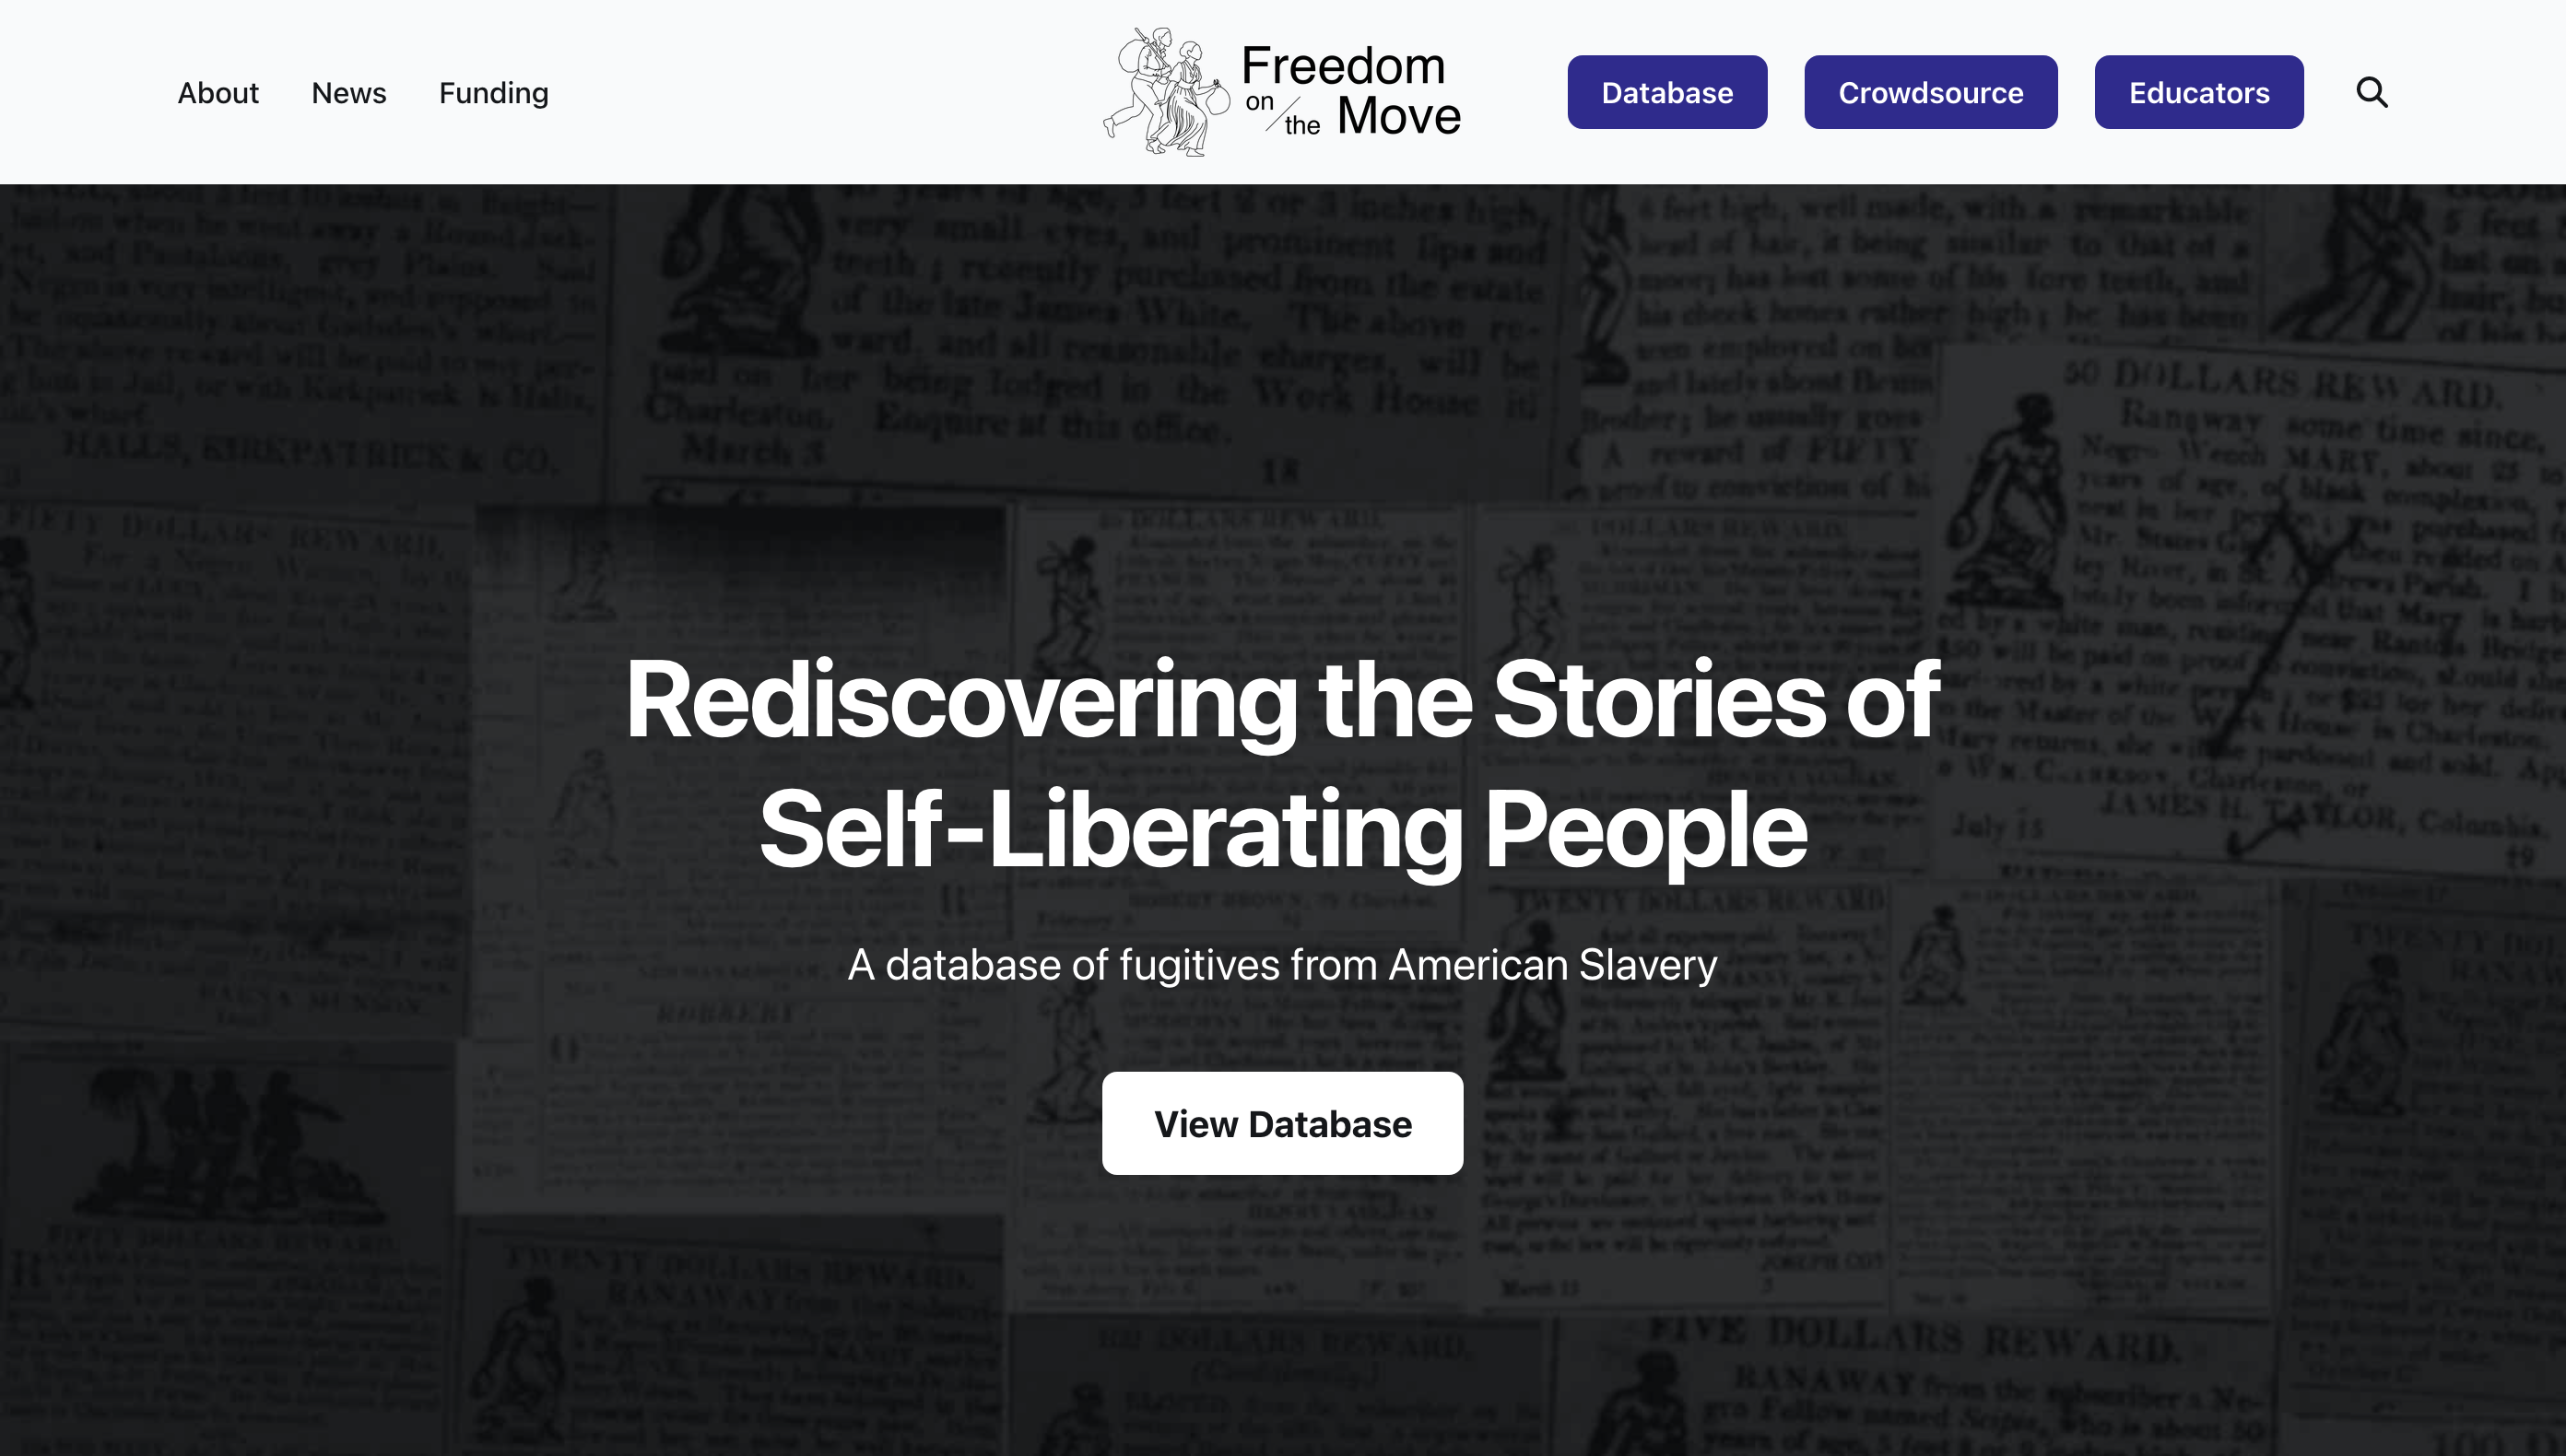 Freedom on the Move-Rediscovering. The Stories of Self-Liberating People